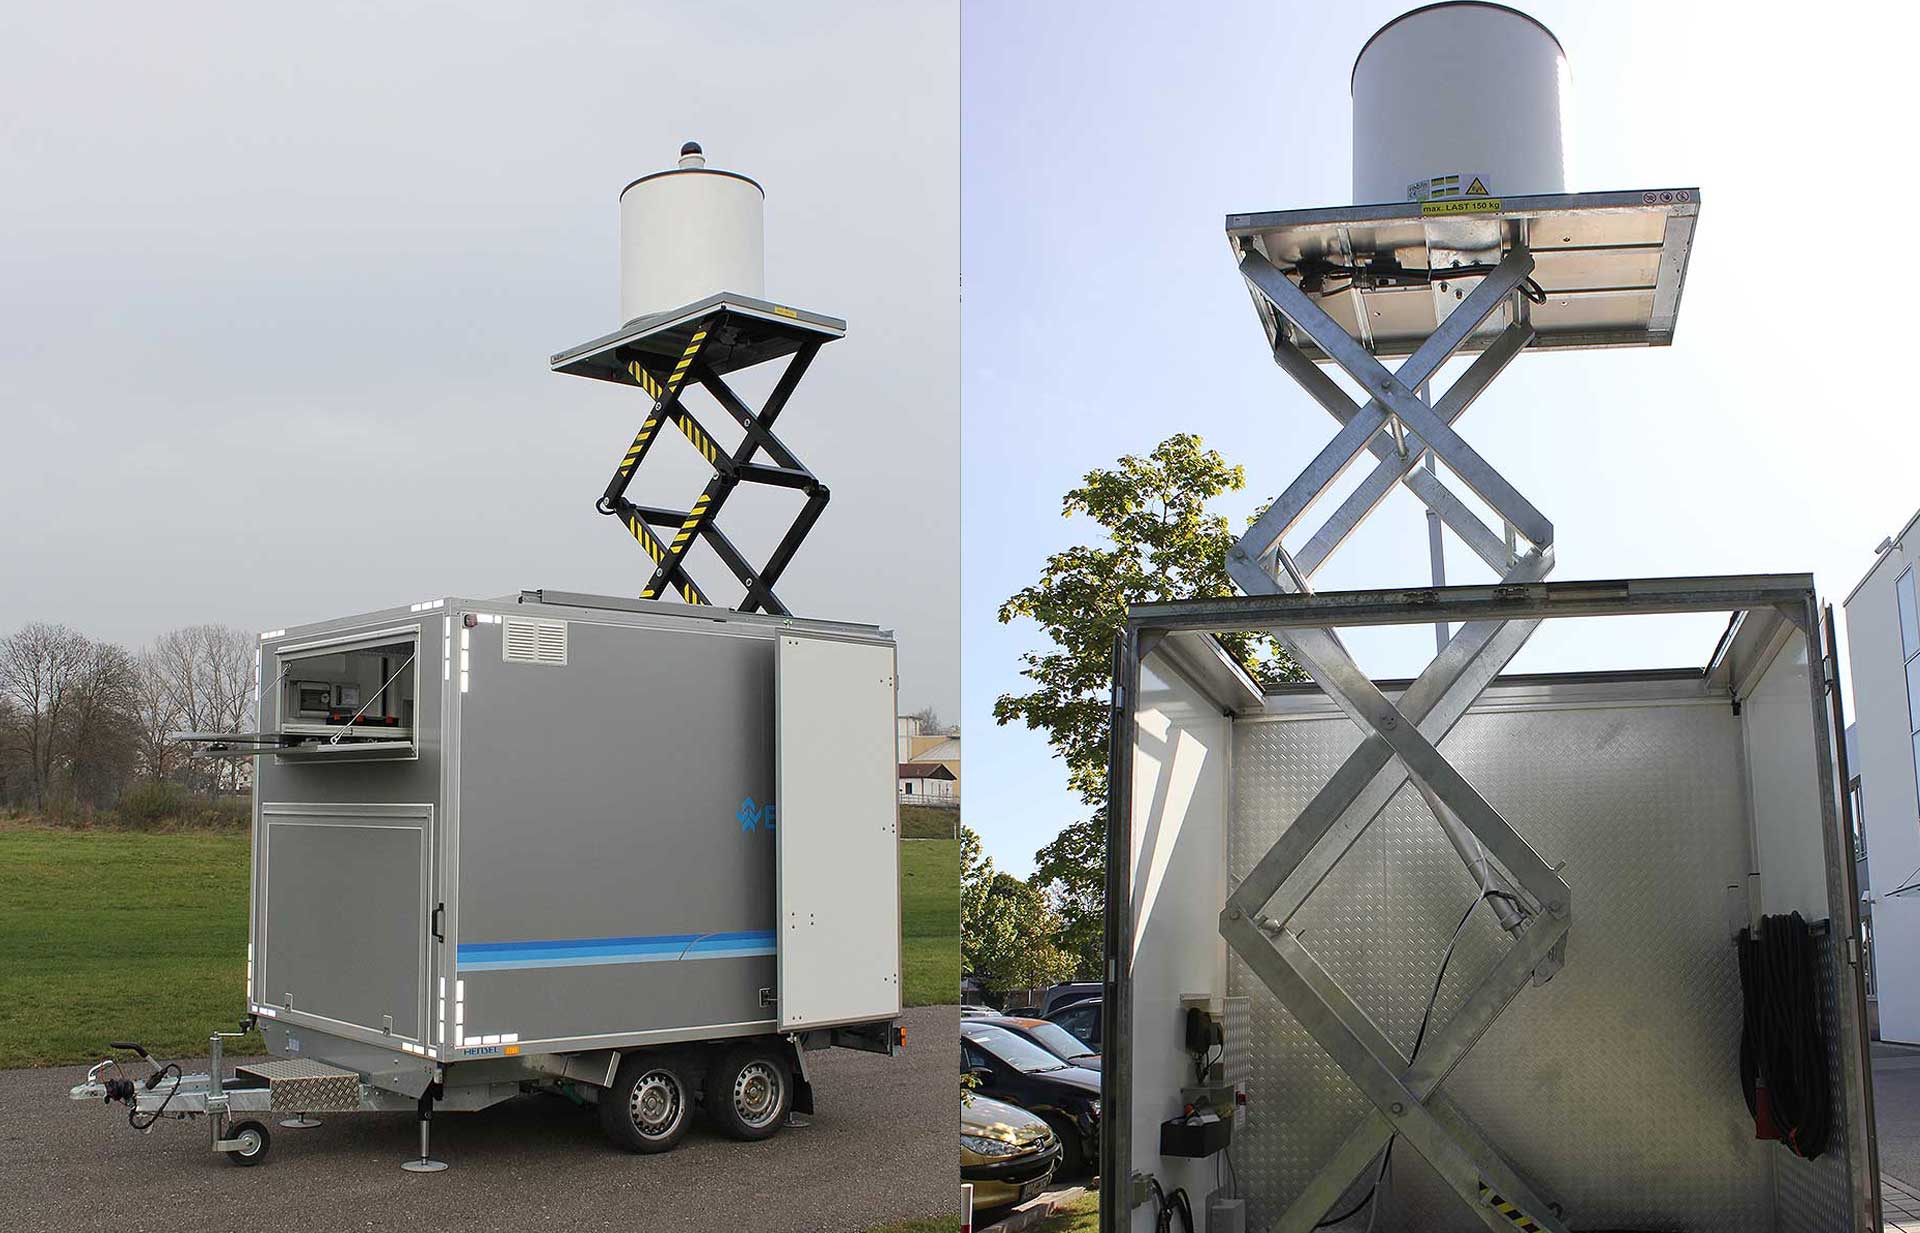 ELVIRA drone detection radar integrated in the Guardian Modular Drone Defence System, mounted on a mobile container